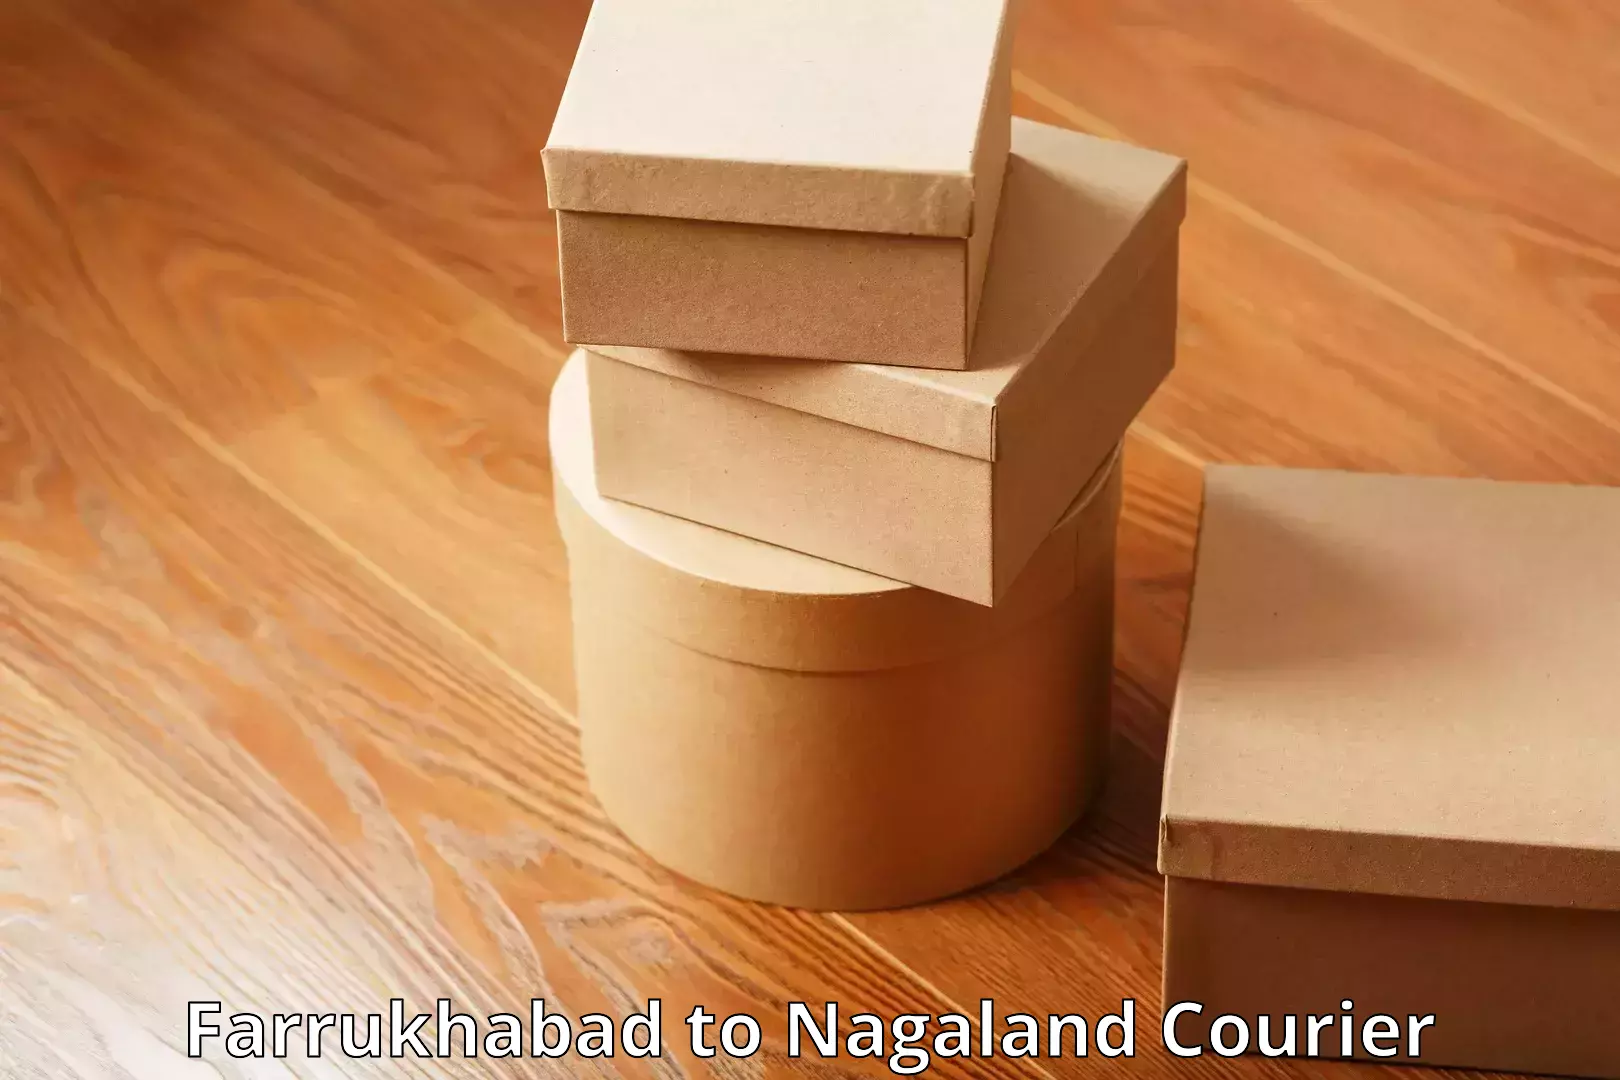 Hassle-free luggage shipping in Farrukhabad to Nagaland